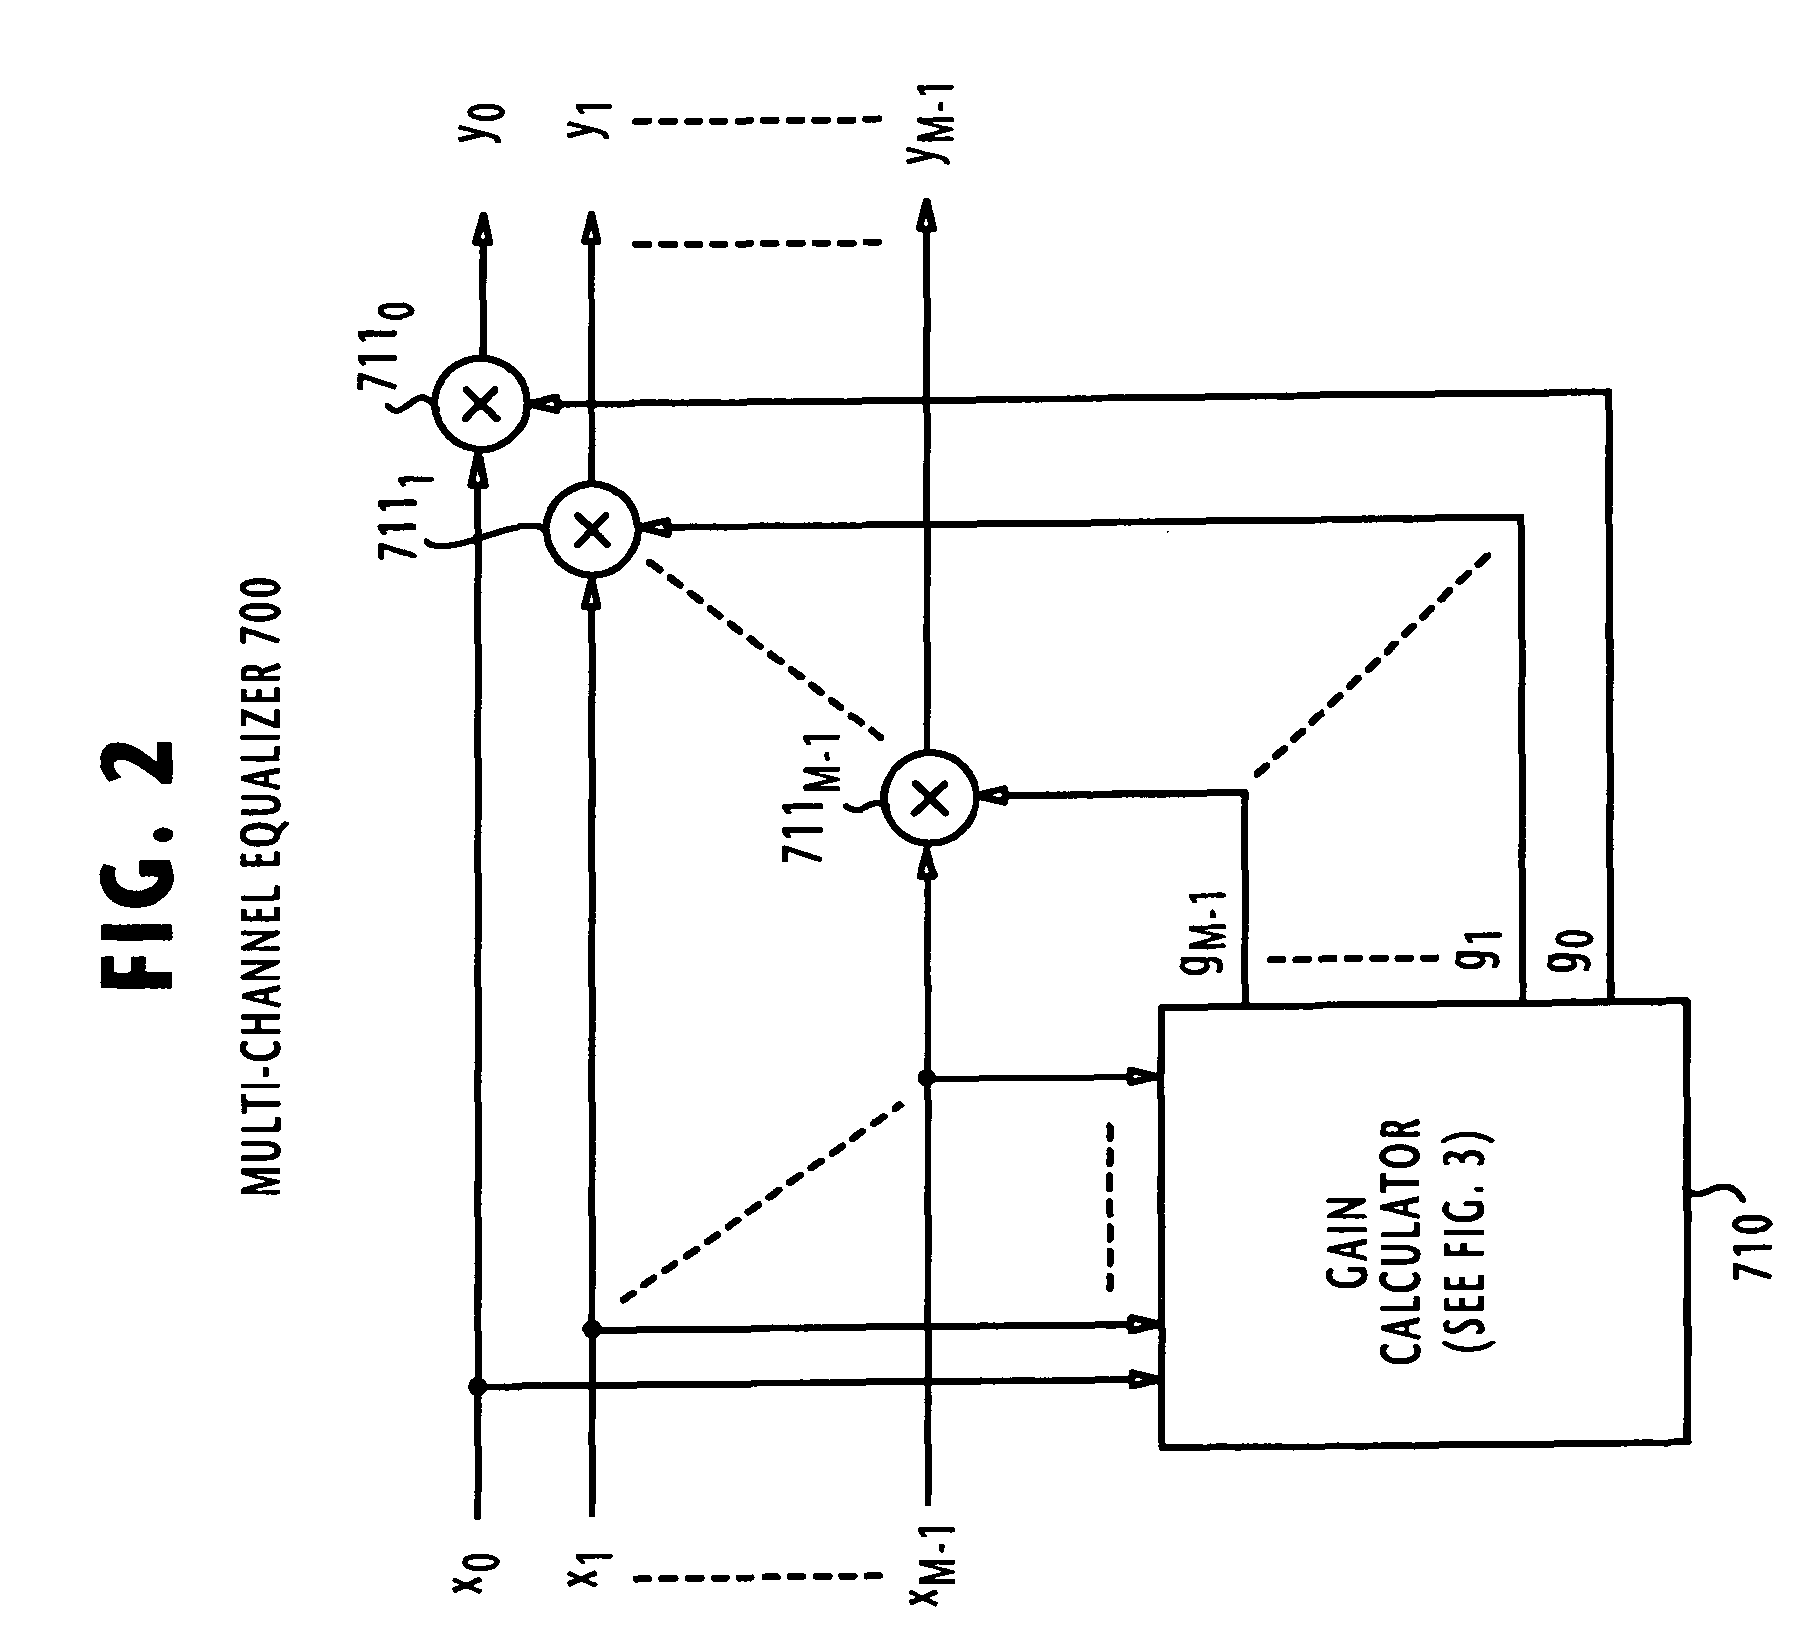 Signal processing system and method for calibrating channel signals supplied from an array of sensors having different operating characteristics